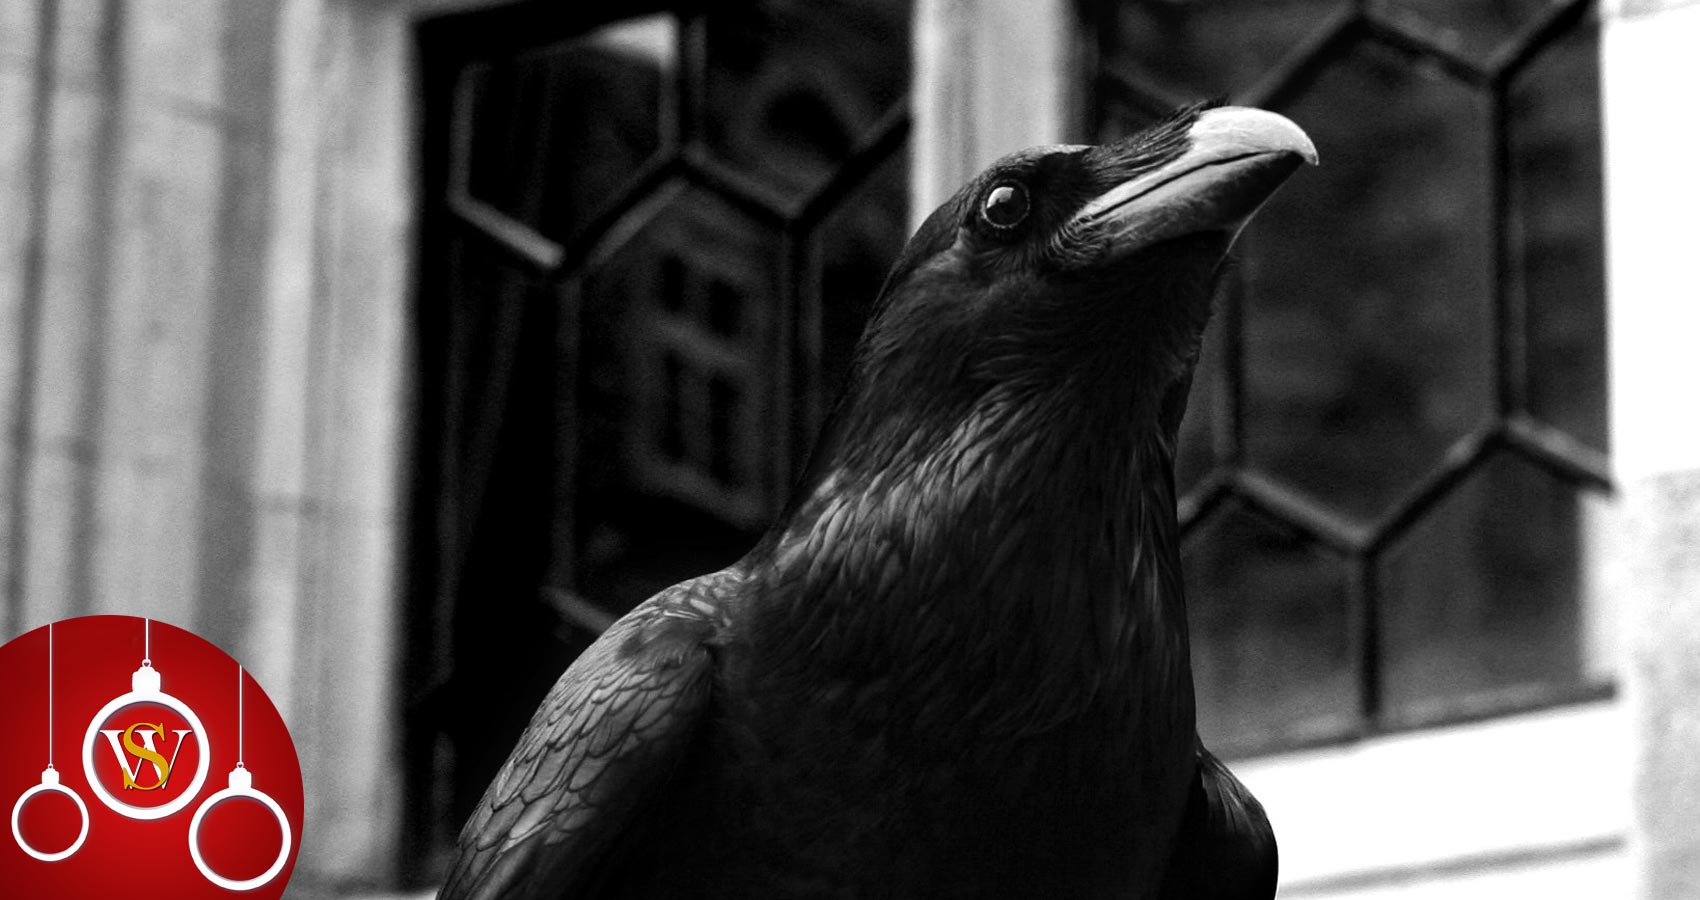 Christmas Crow, a poem written by Lynn White at Spillwords.com